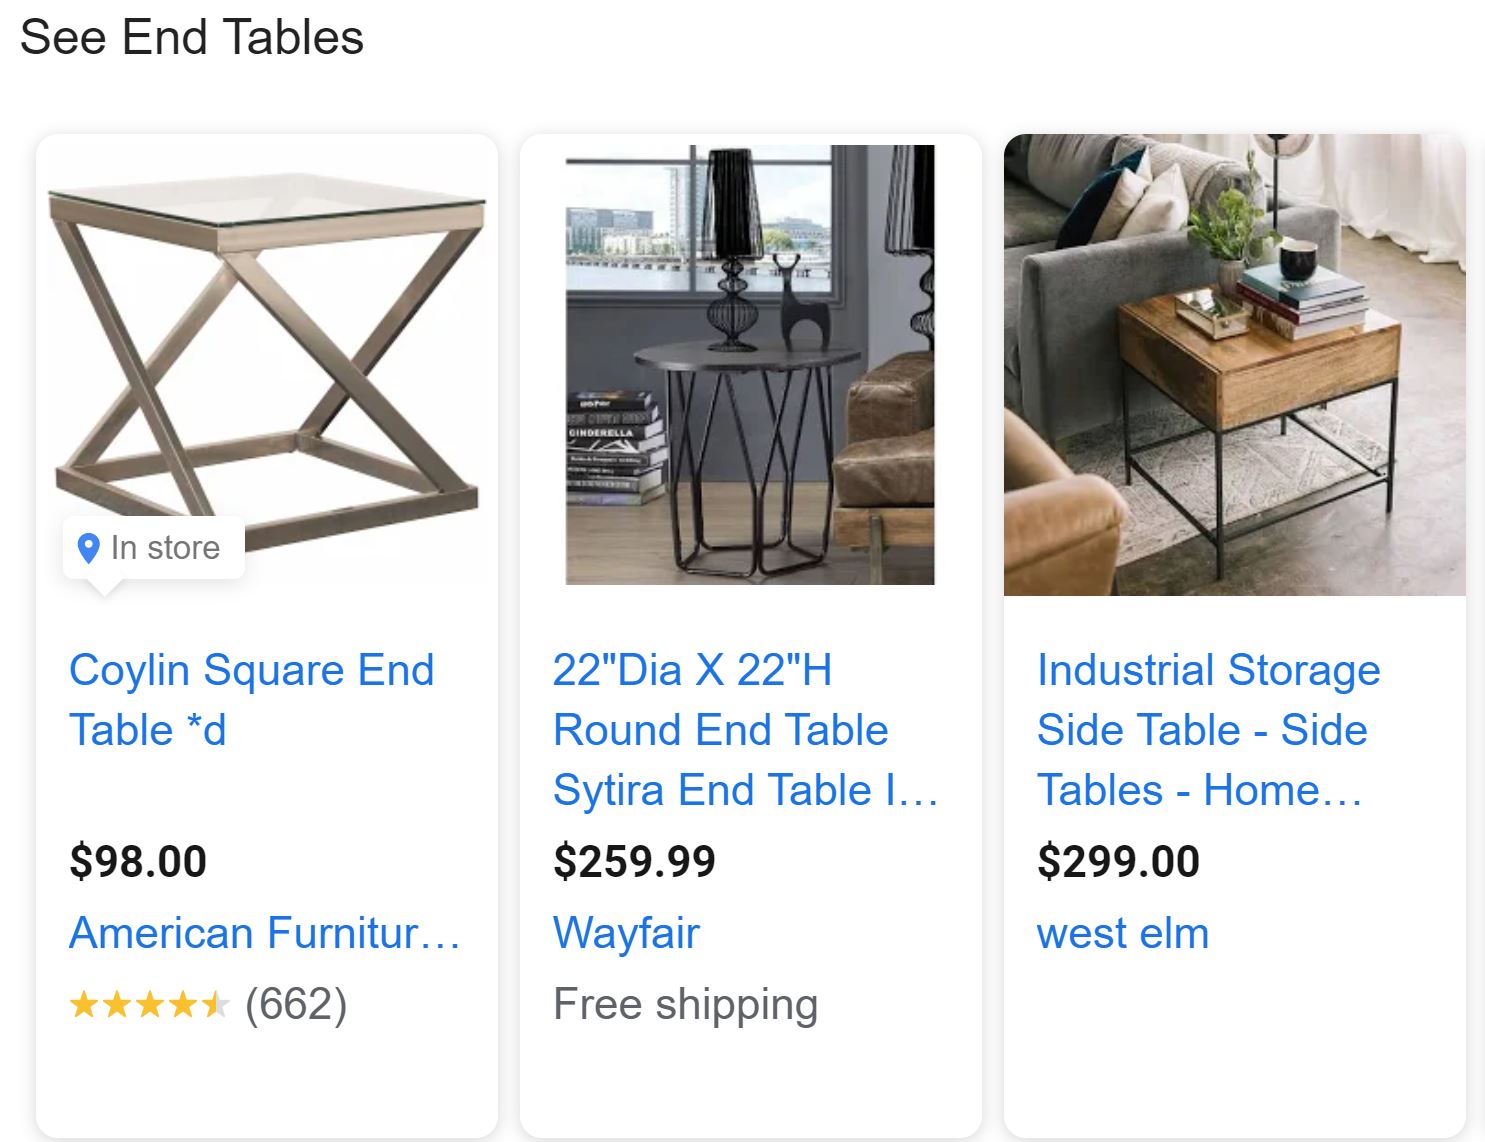 Product title examples in Google Shopping